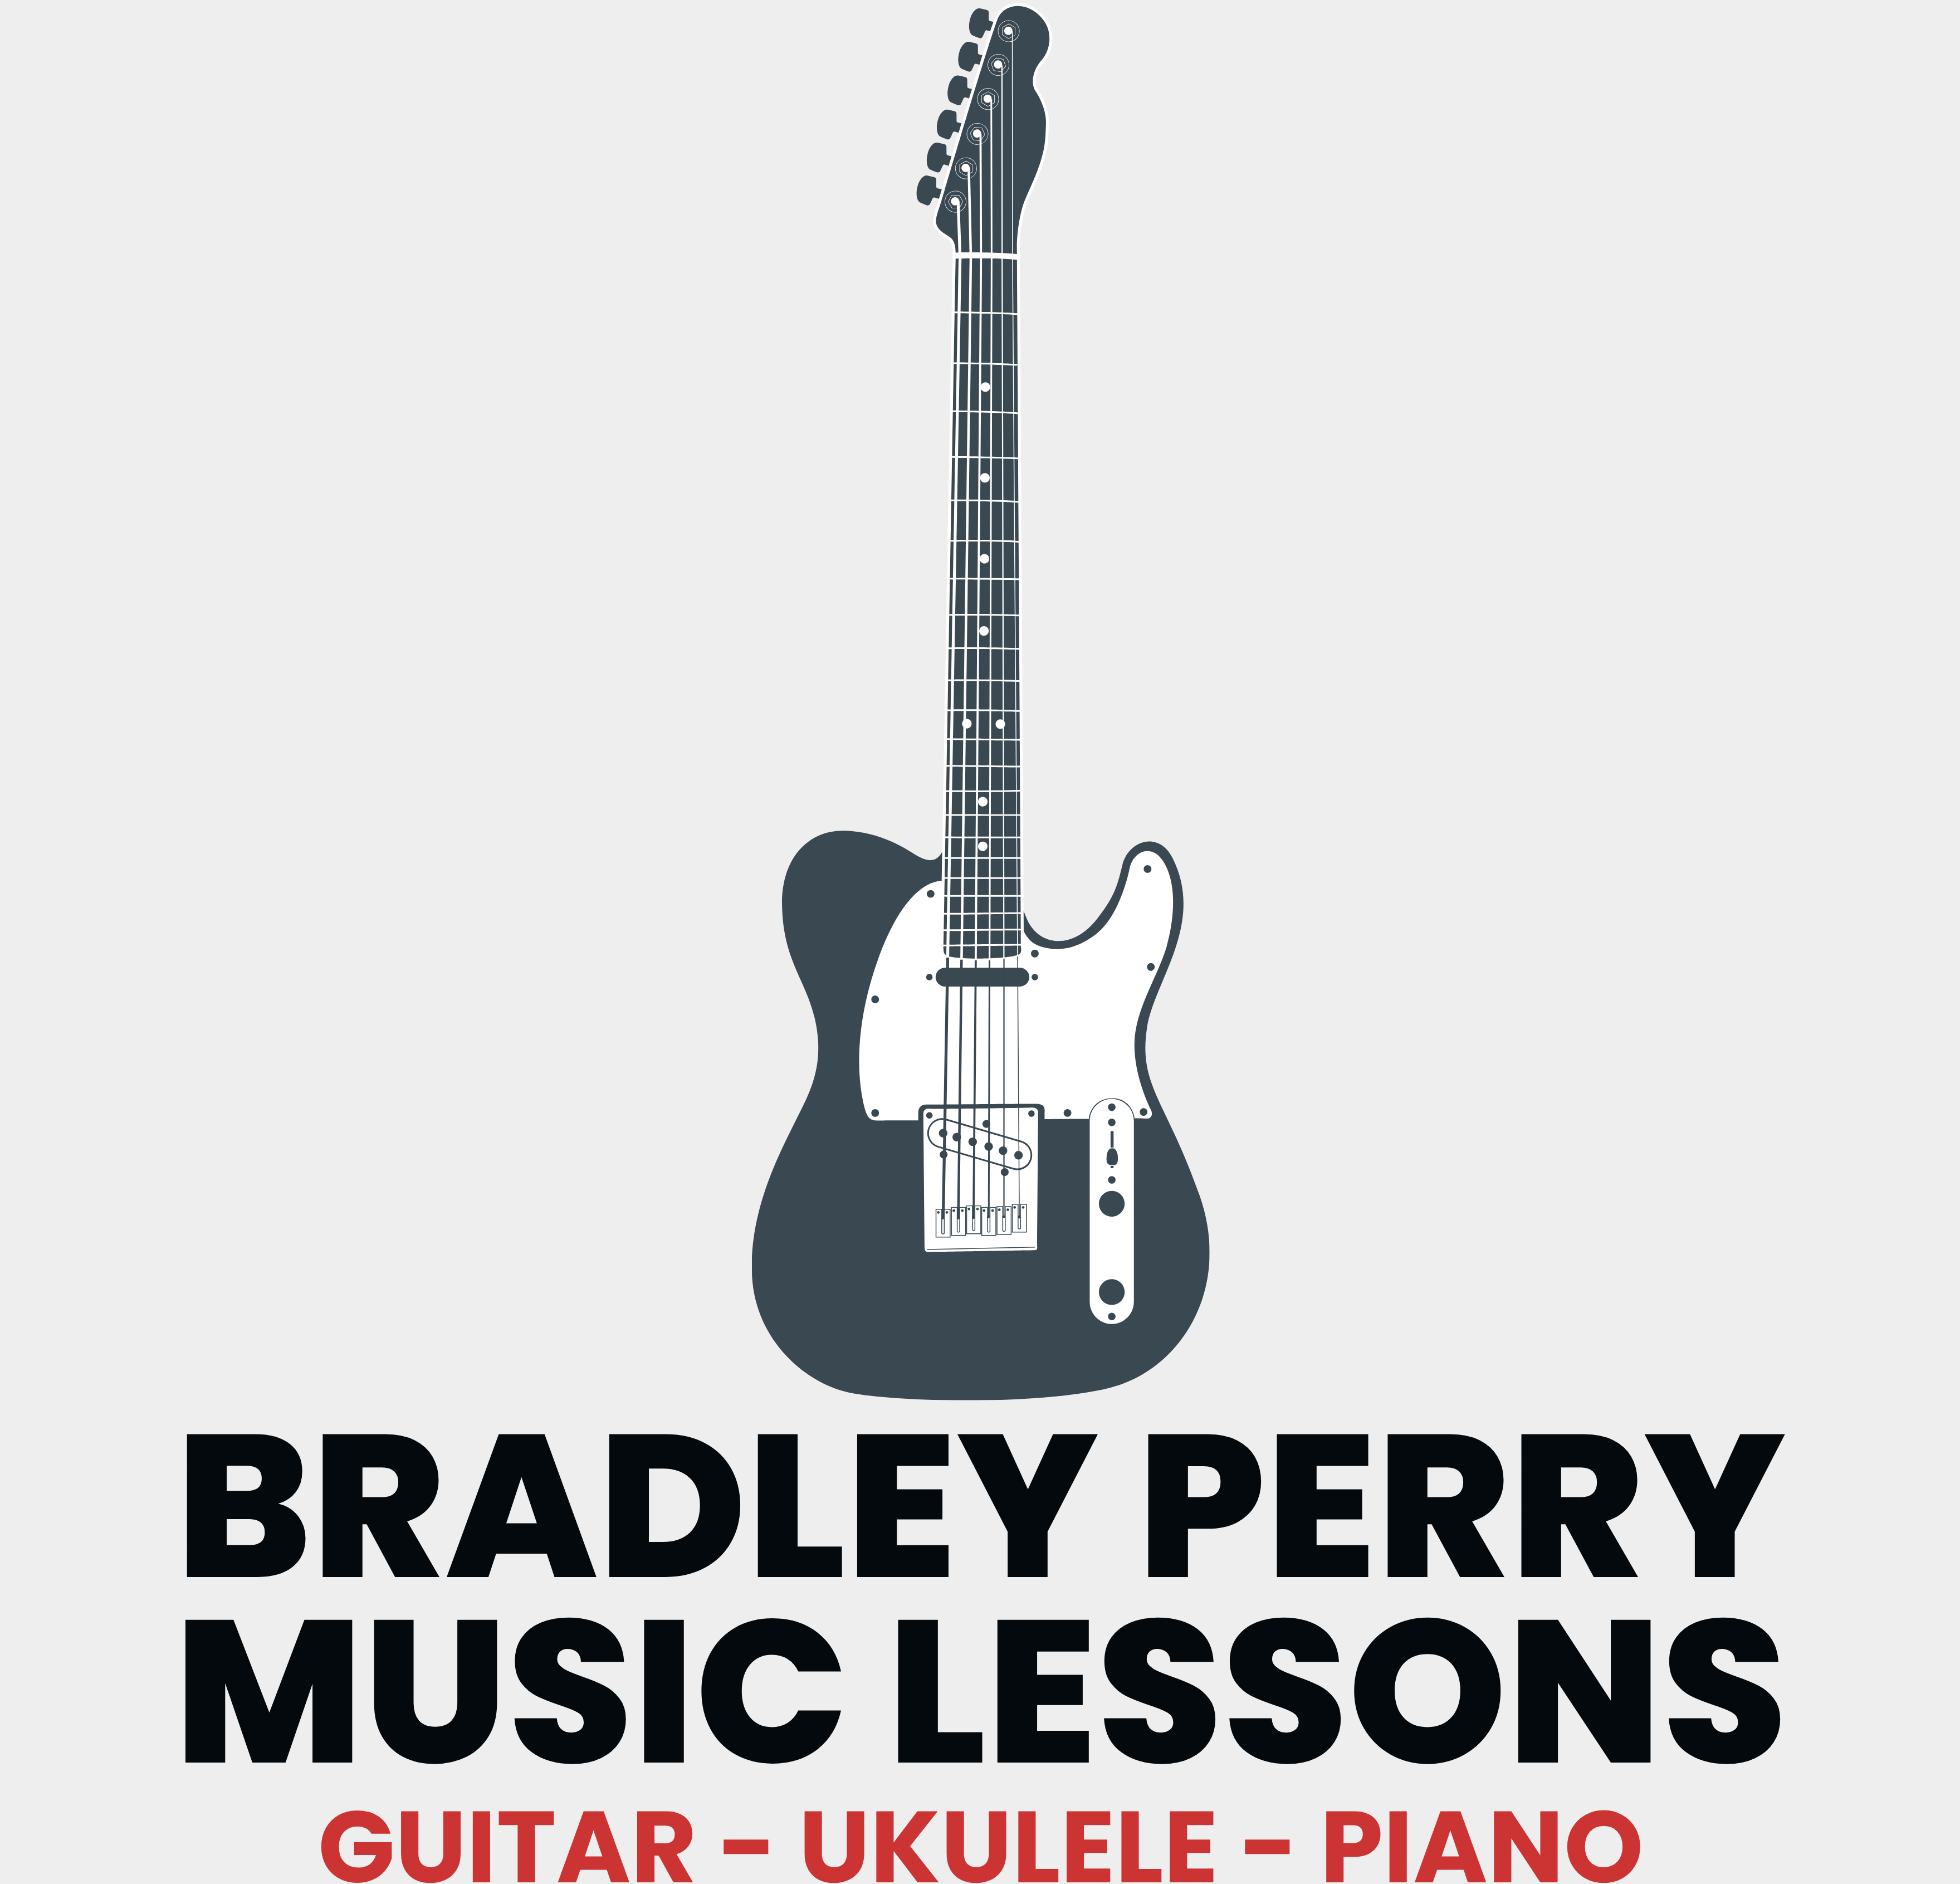 Bradley Perry Music lessons